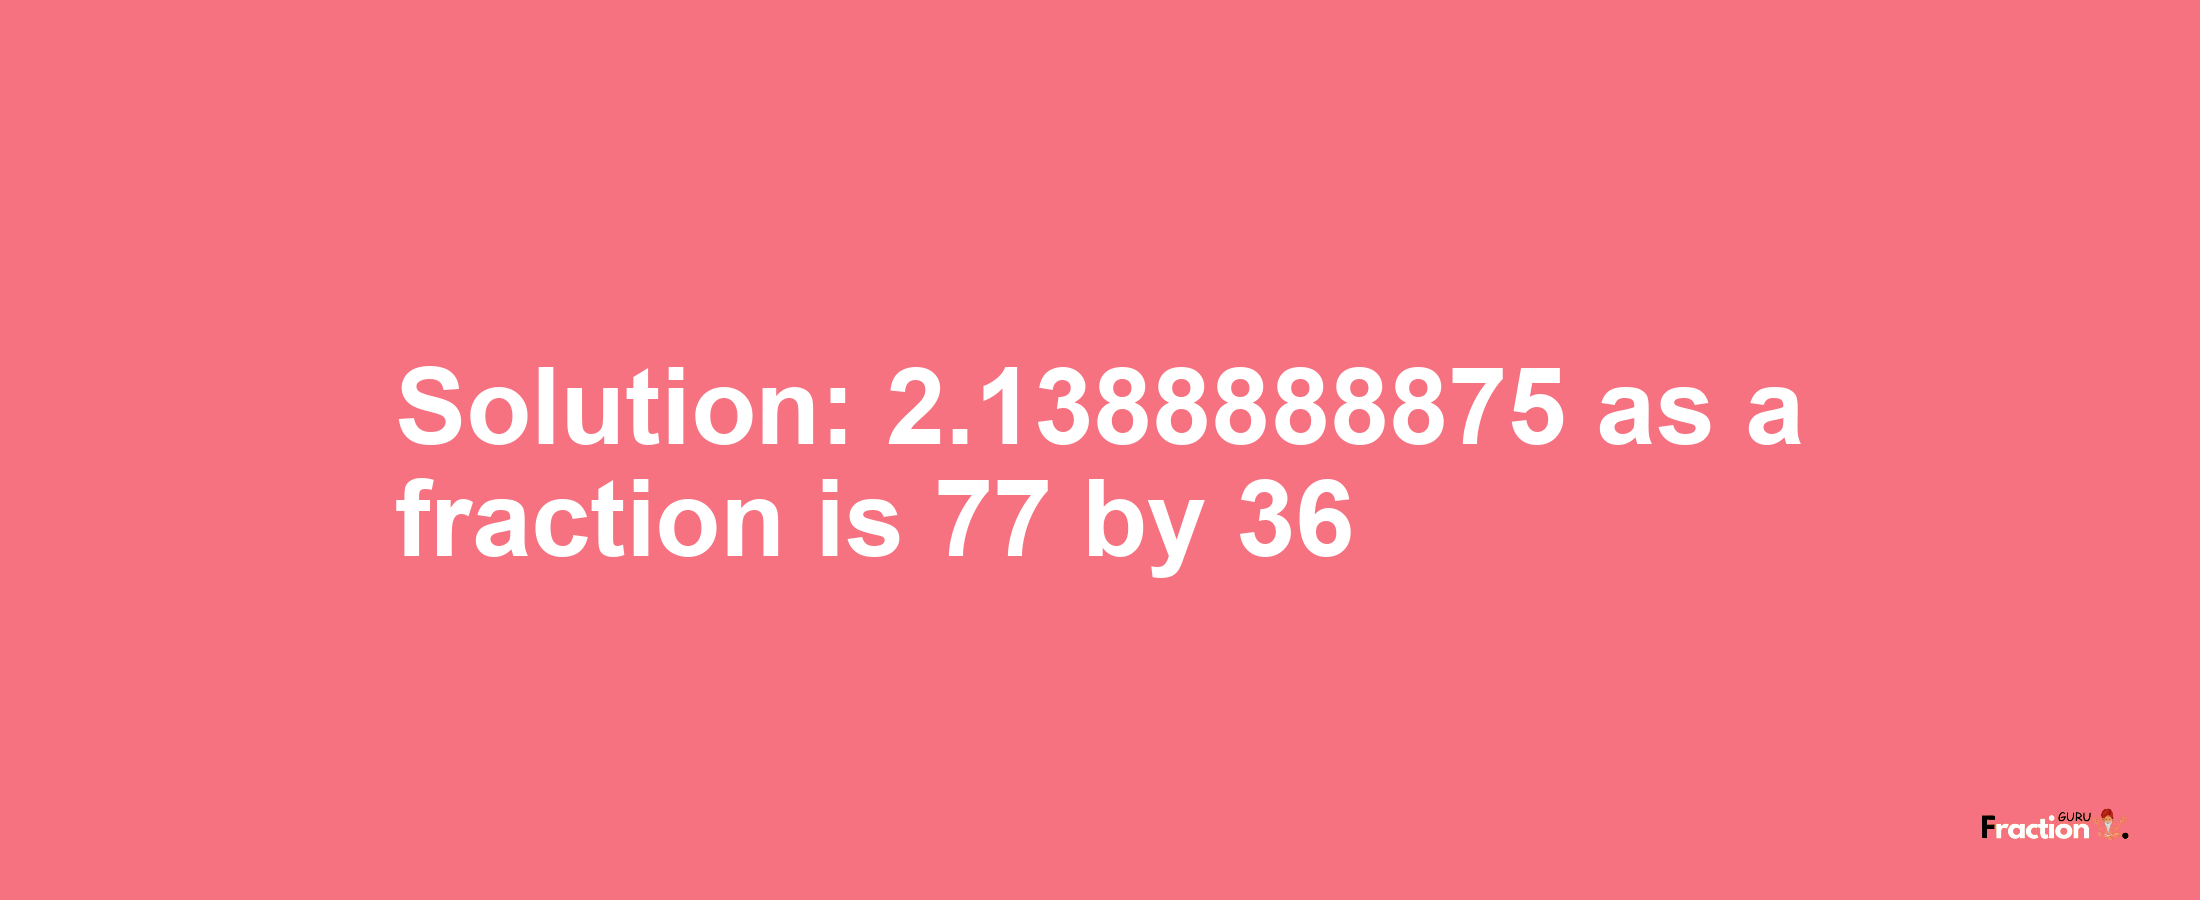 Solution:2.1388888875 as a fraction is 77/36